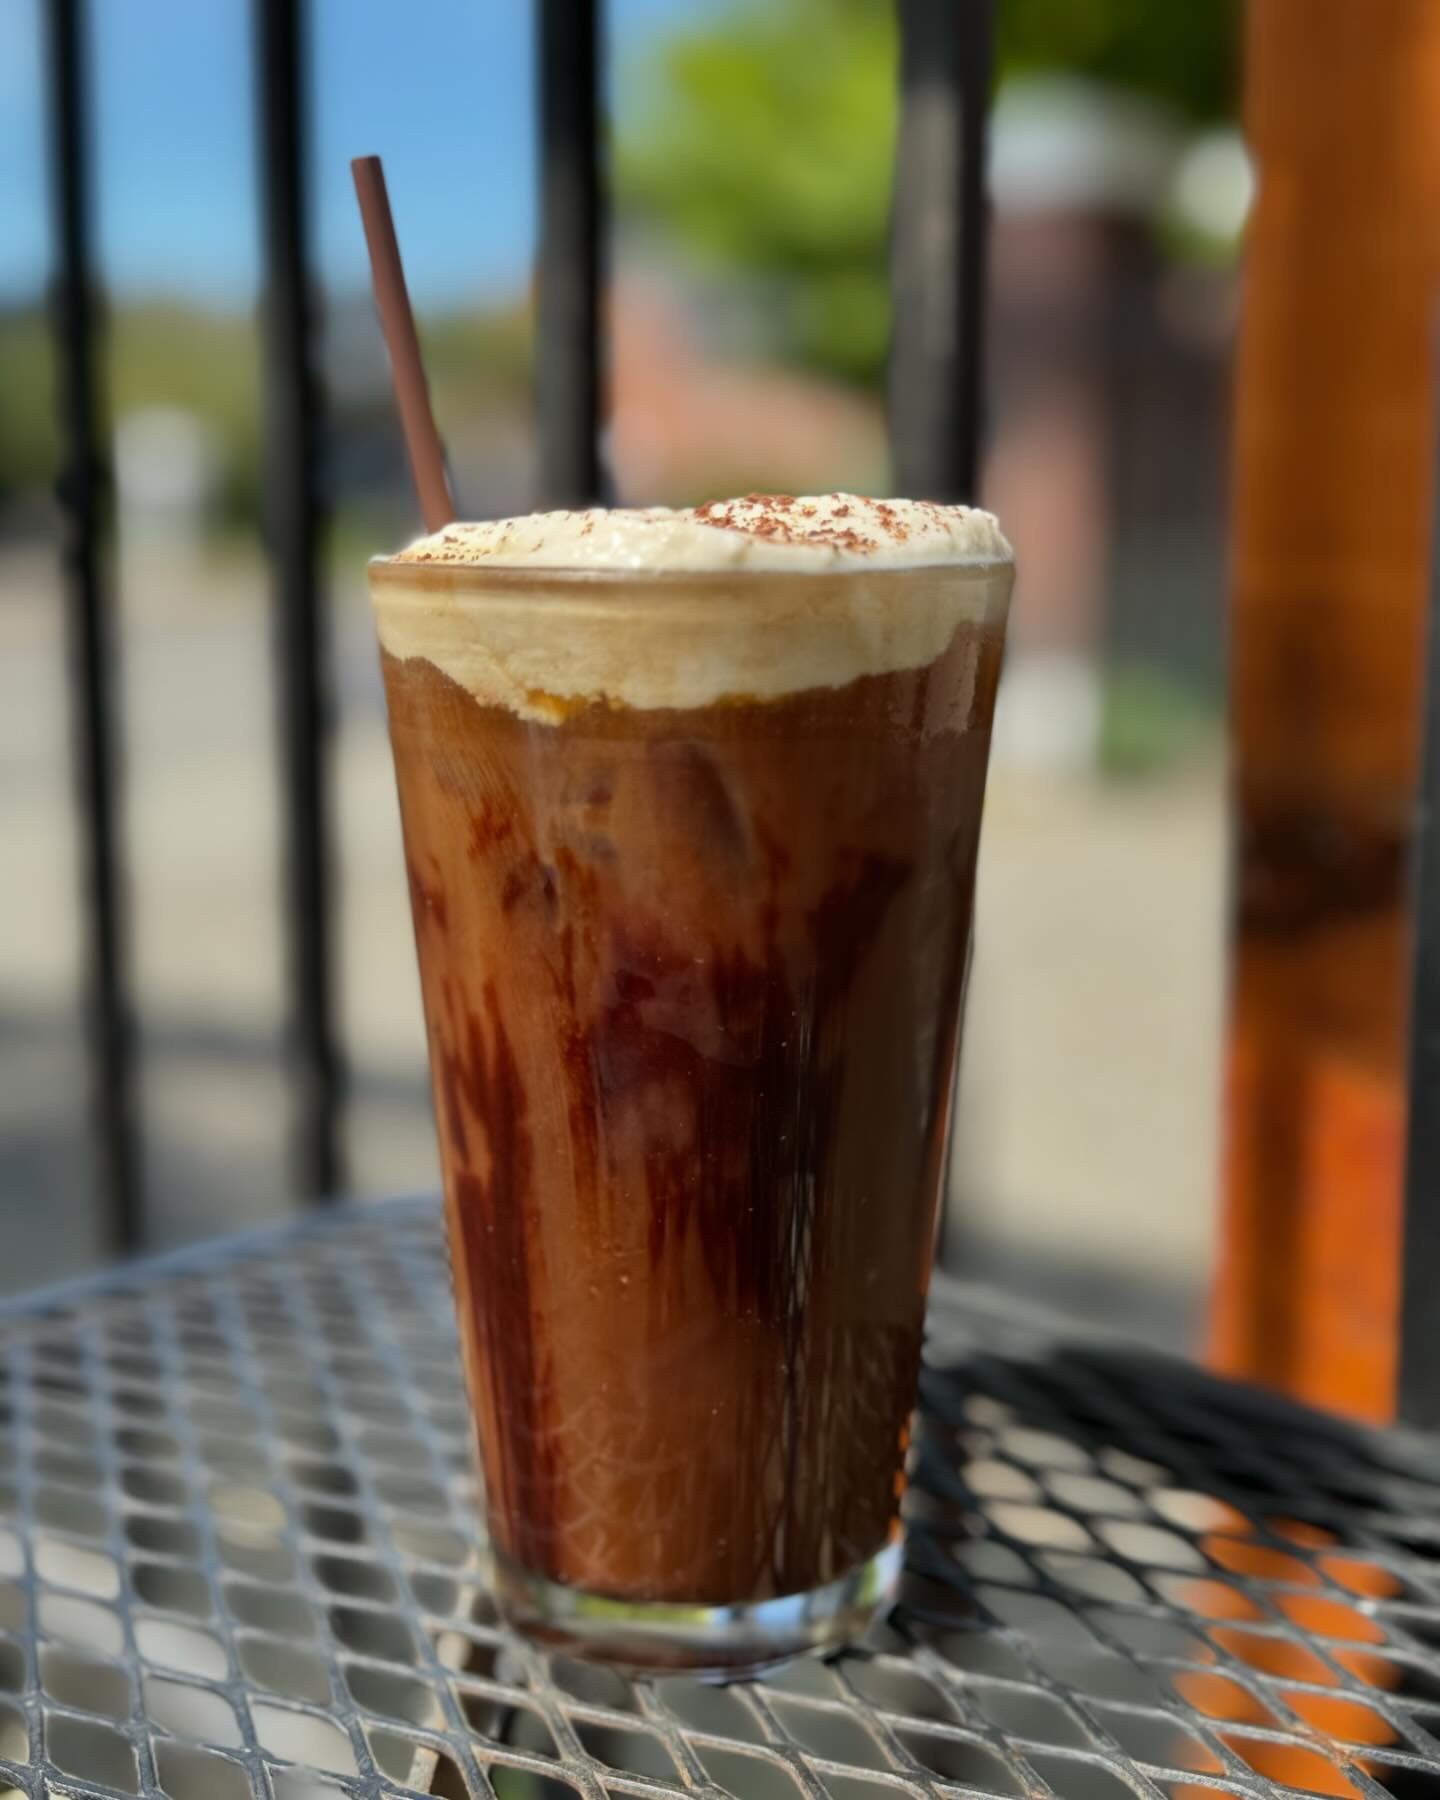 Summer Sun Special Spotlight: S&rsquo;mores Cold Brew&mdash;campfire cold brew topped with marshmallow cold foam 🔥 campfire not included. ➕☕️

#hotwire #seattlecoffee #specialsofthemonth #hotwirecoffee #westseattle #coffeeholic #caffeine #igcoffee #